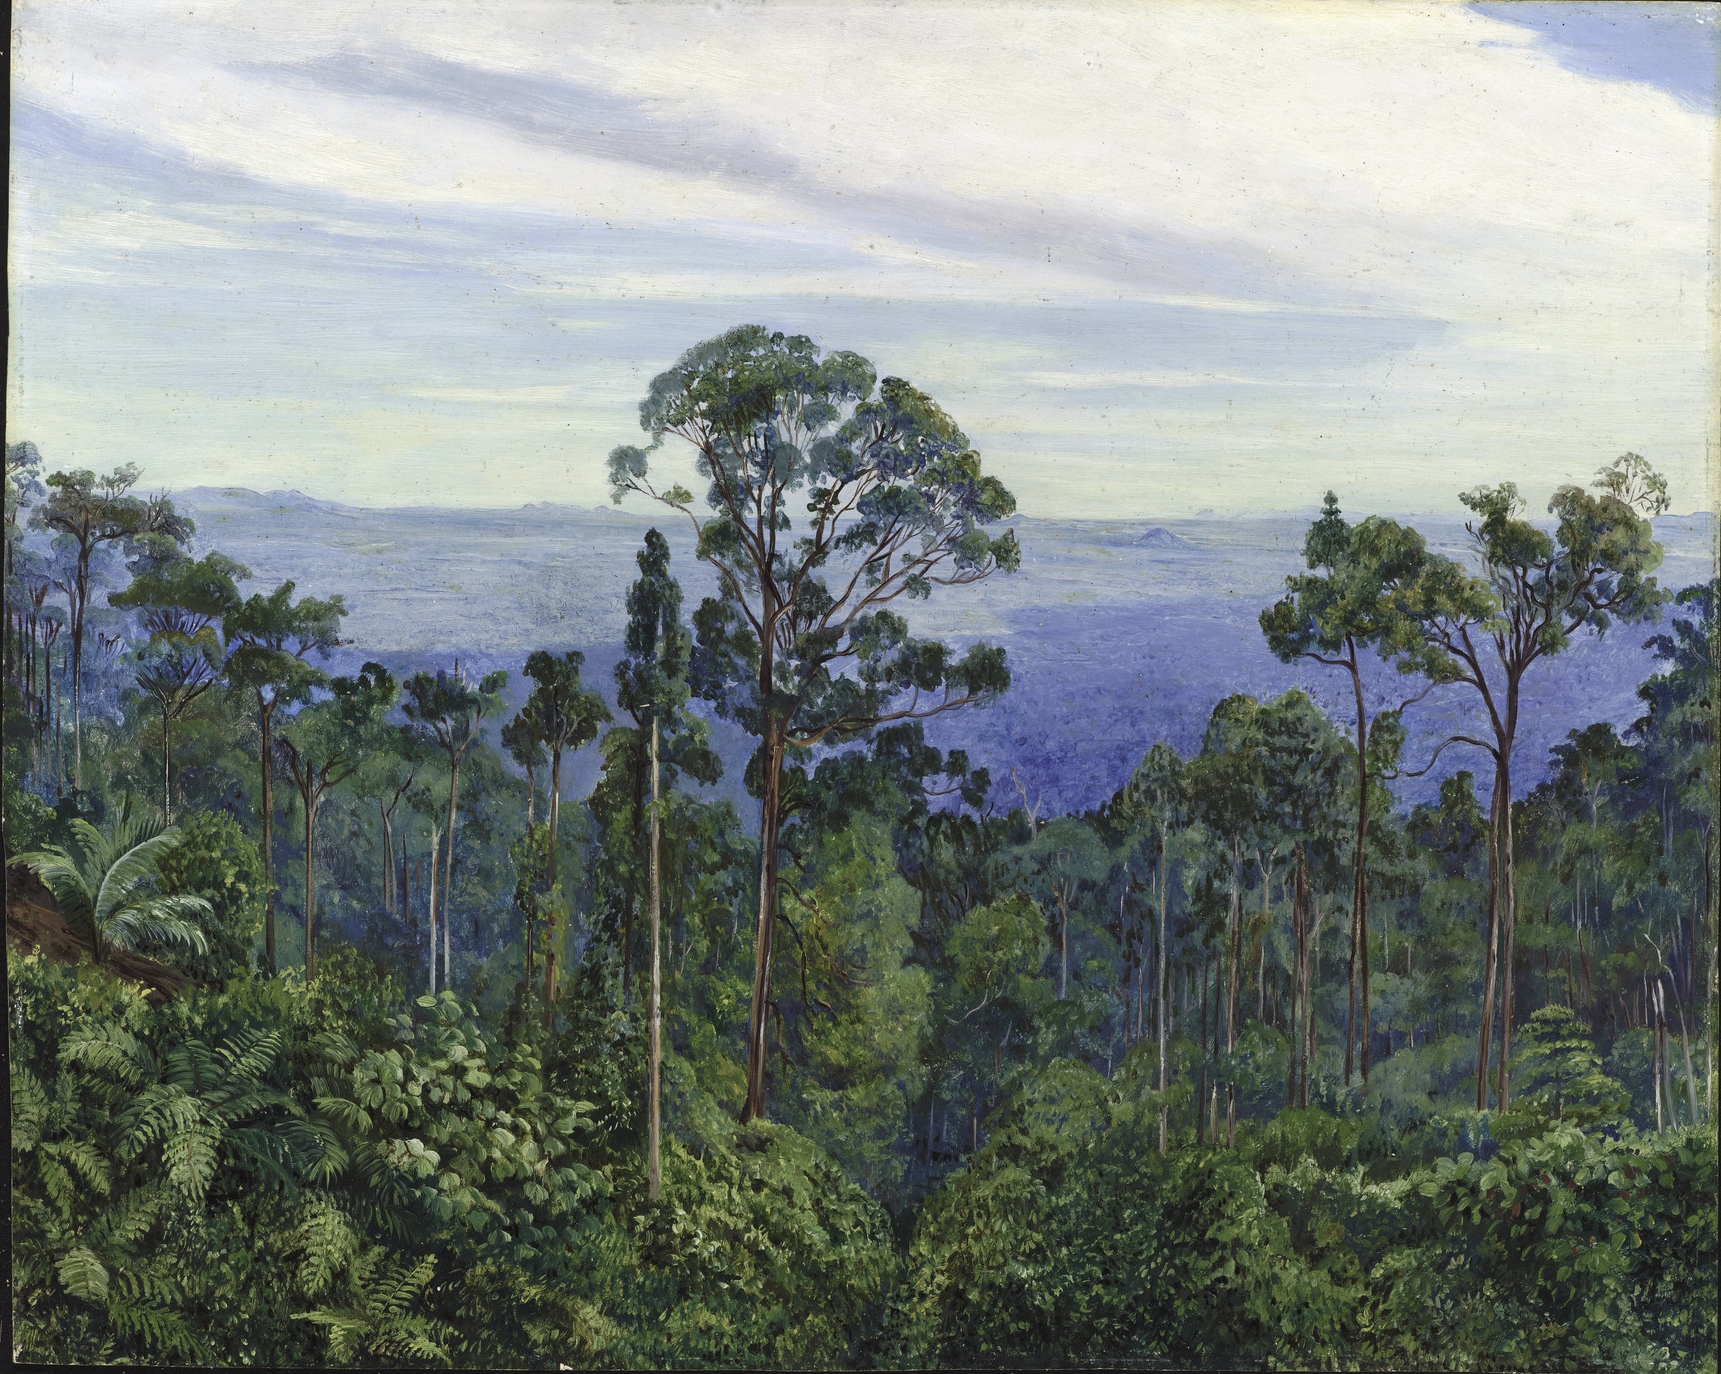 View of the Matang over the Great Swamp, Sarawak (Borneo)